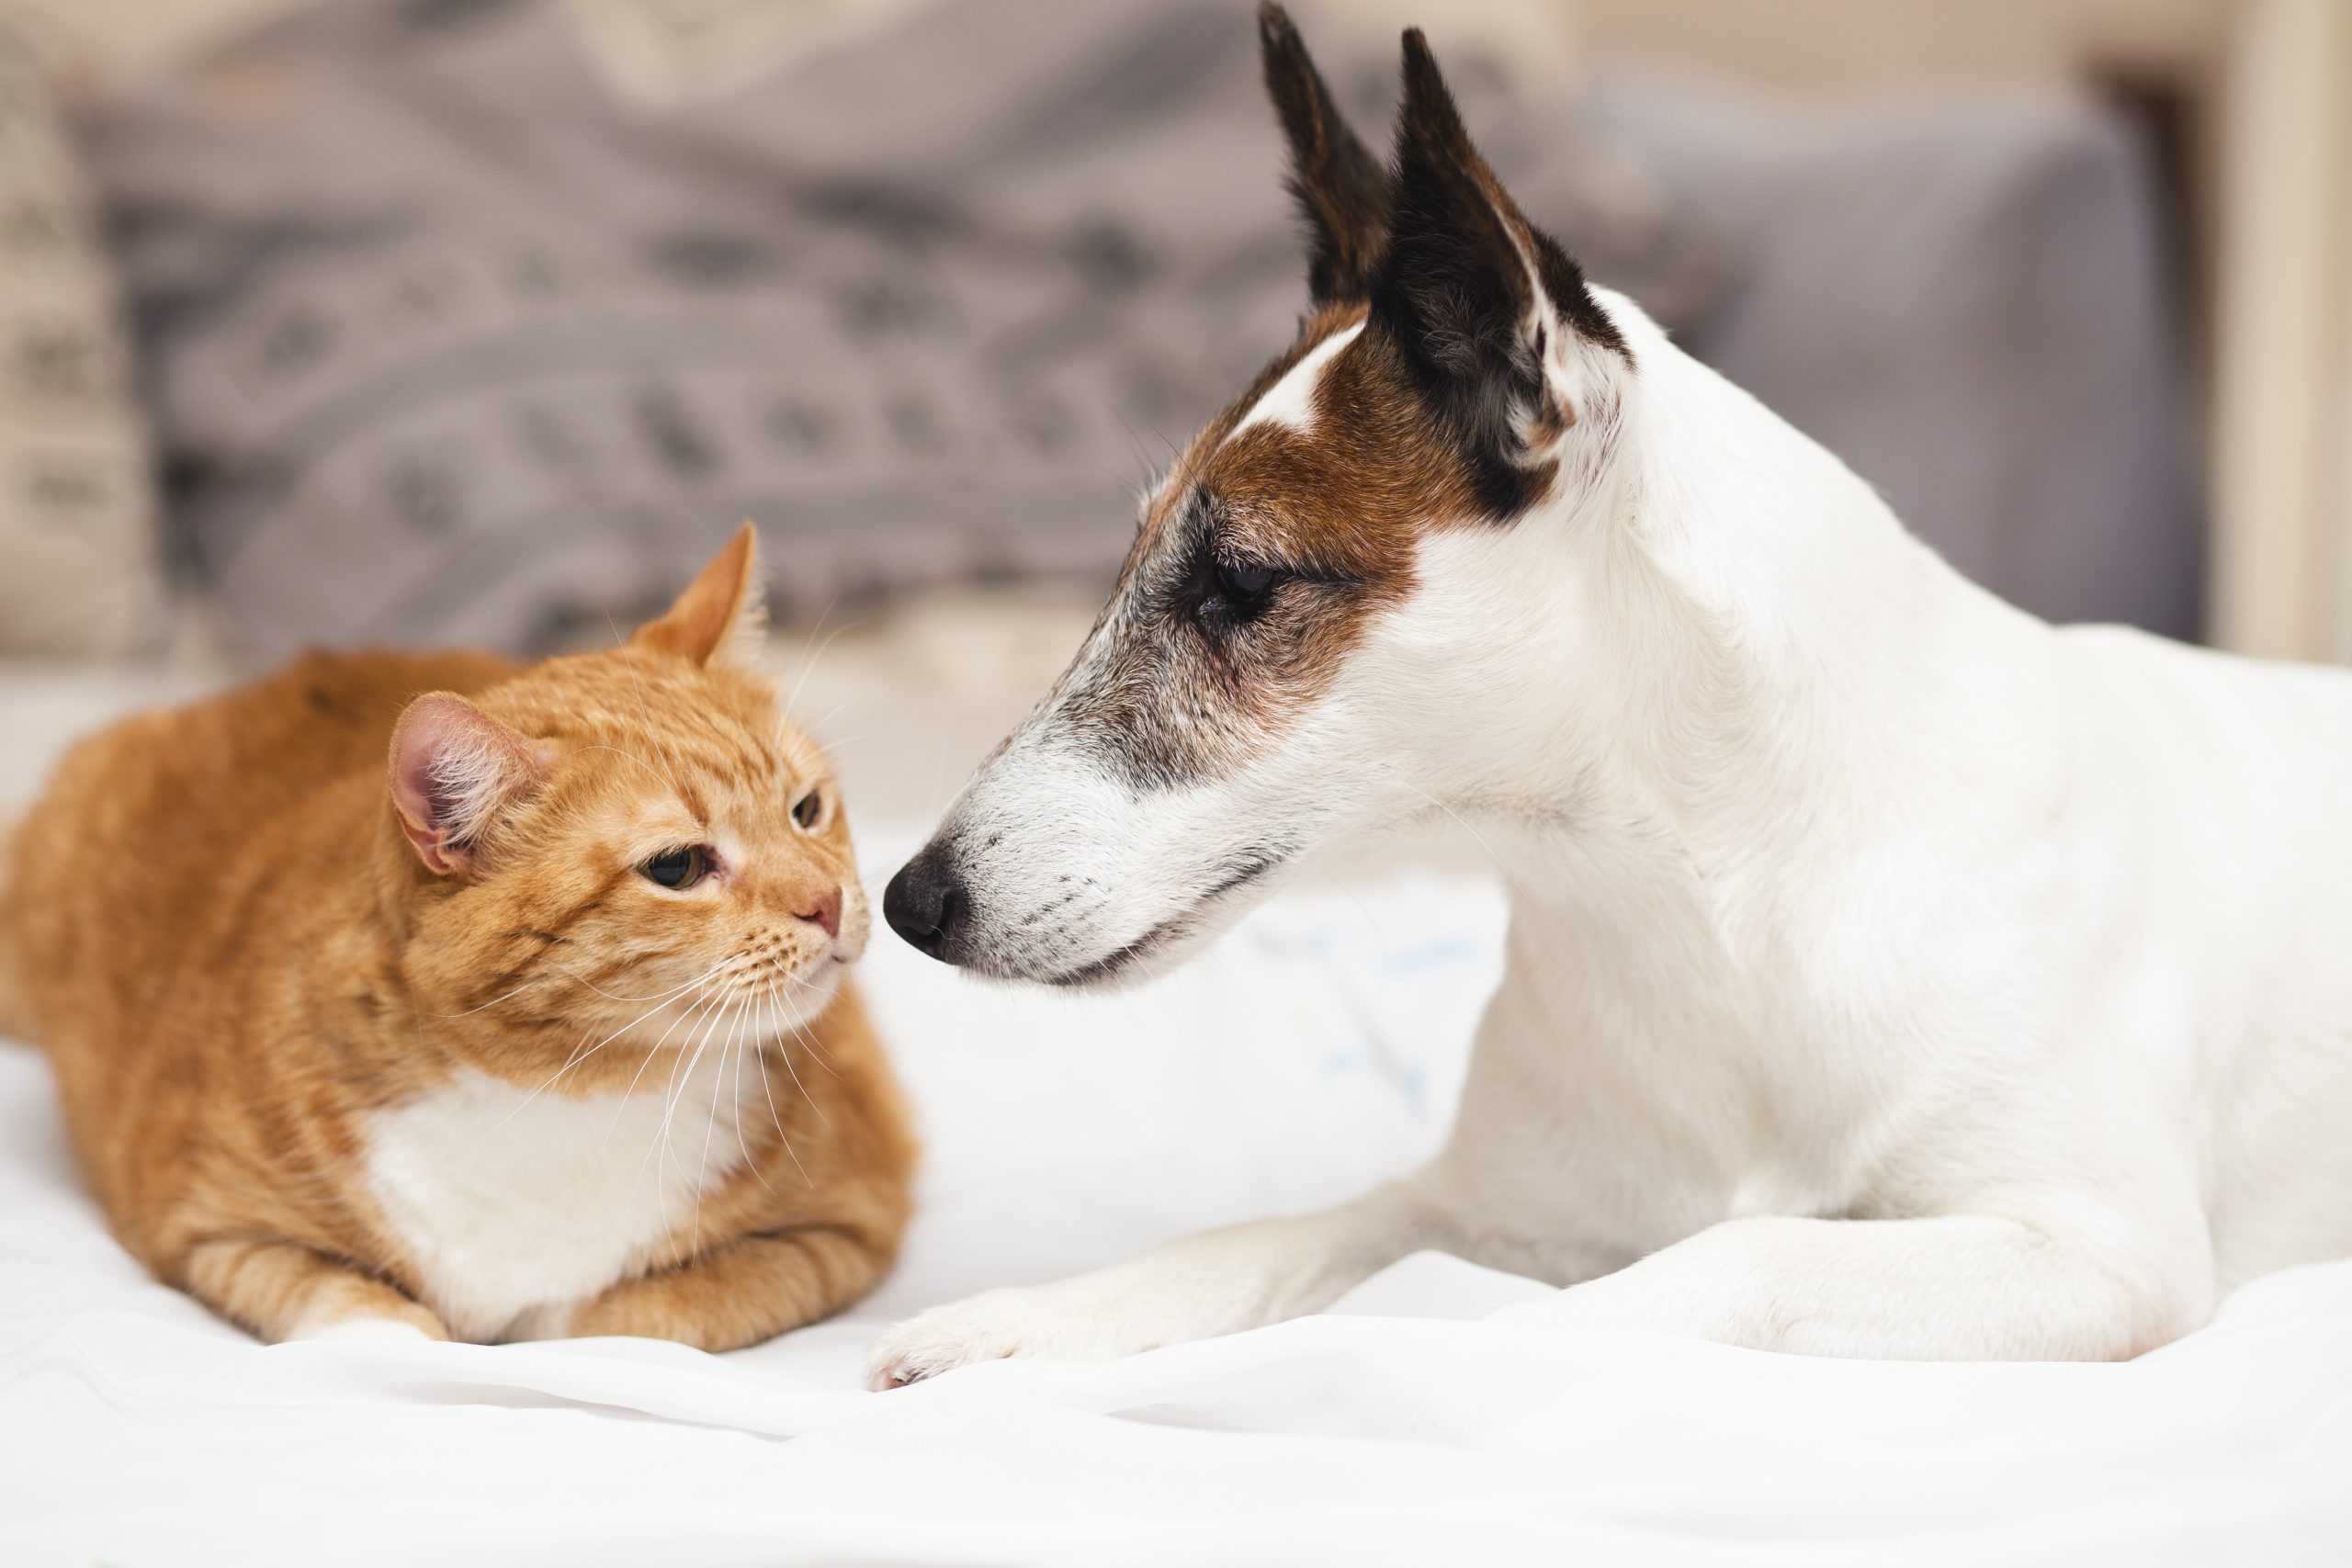 Jack Russell looking at cat lying next to him